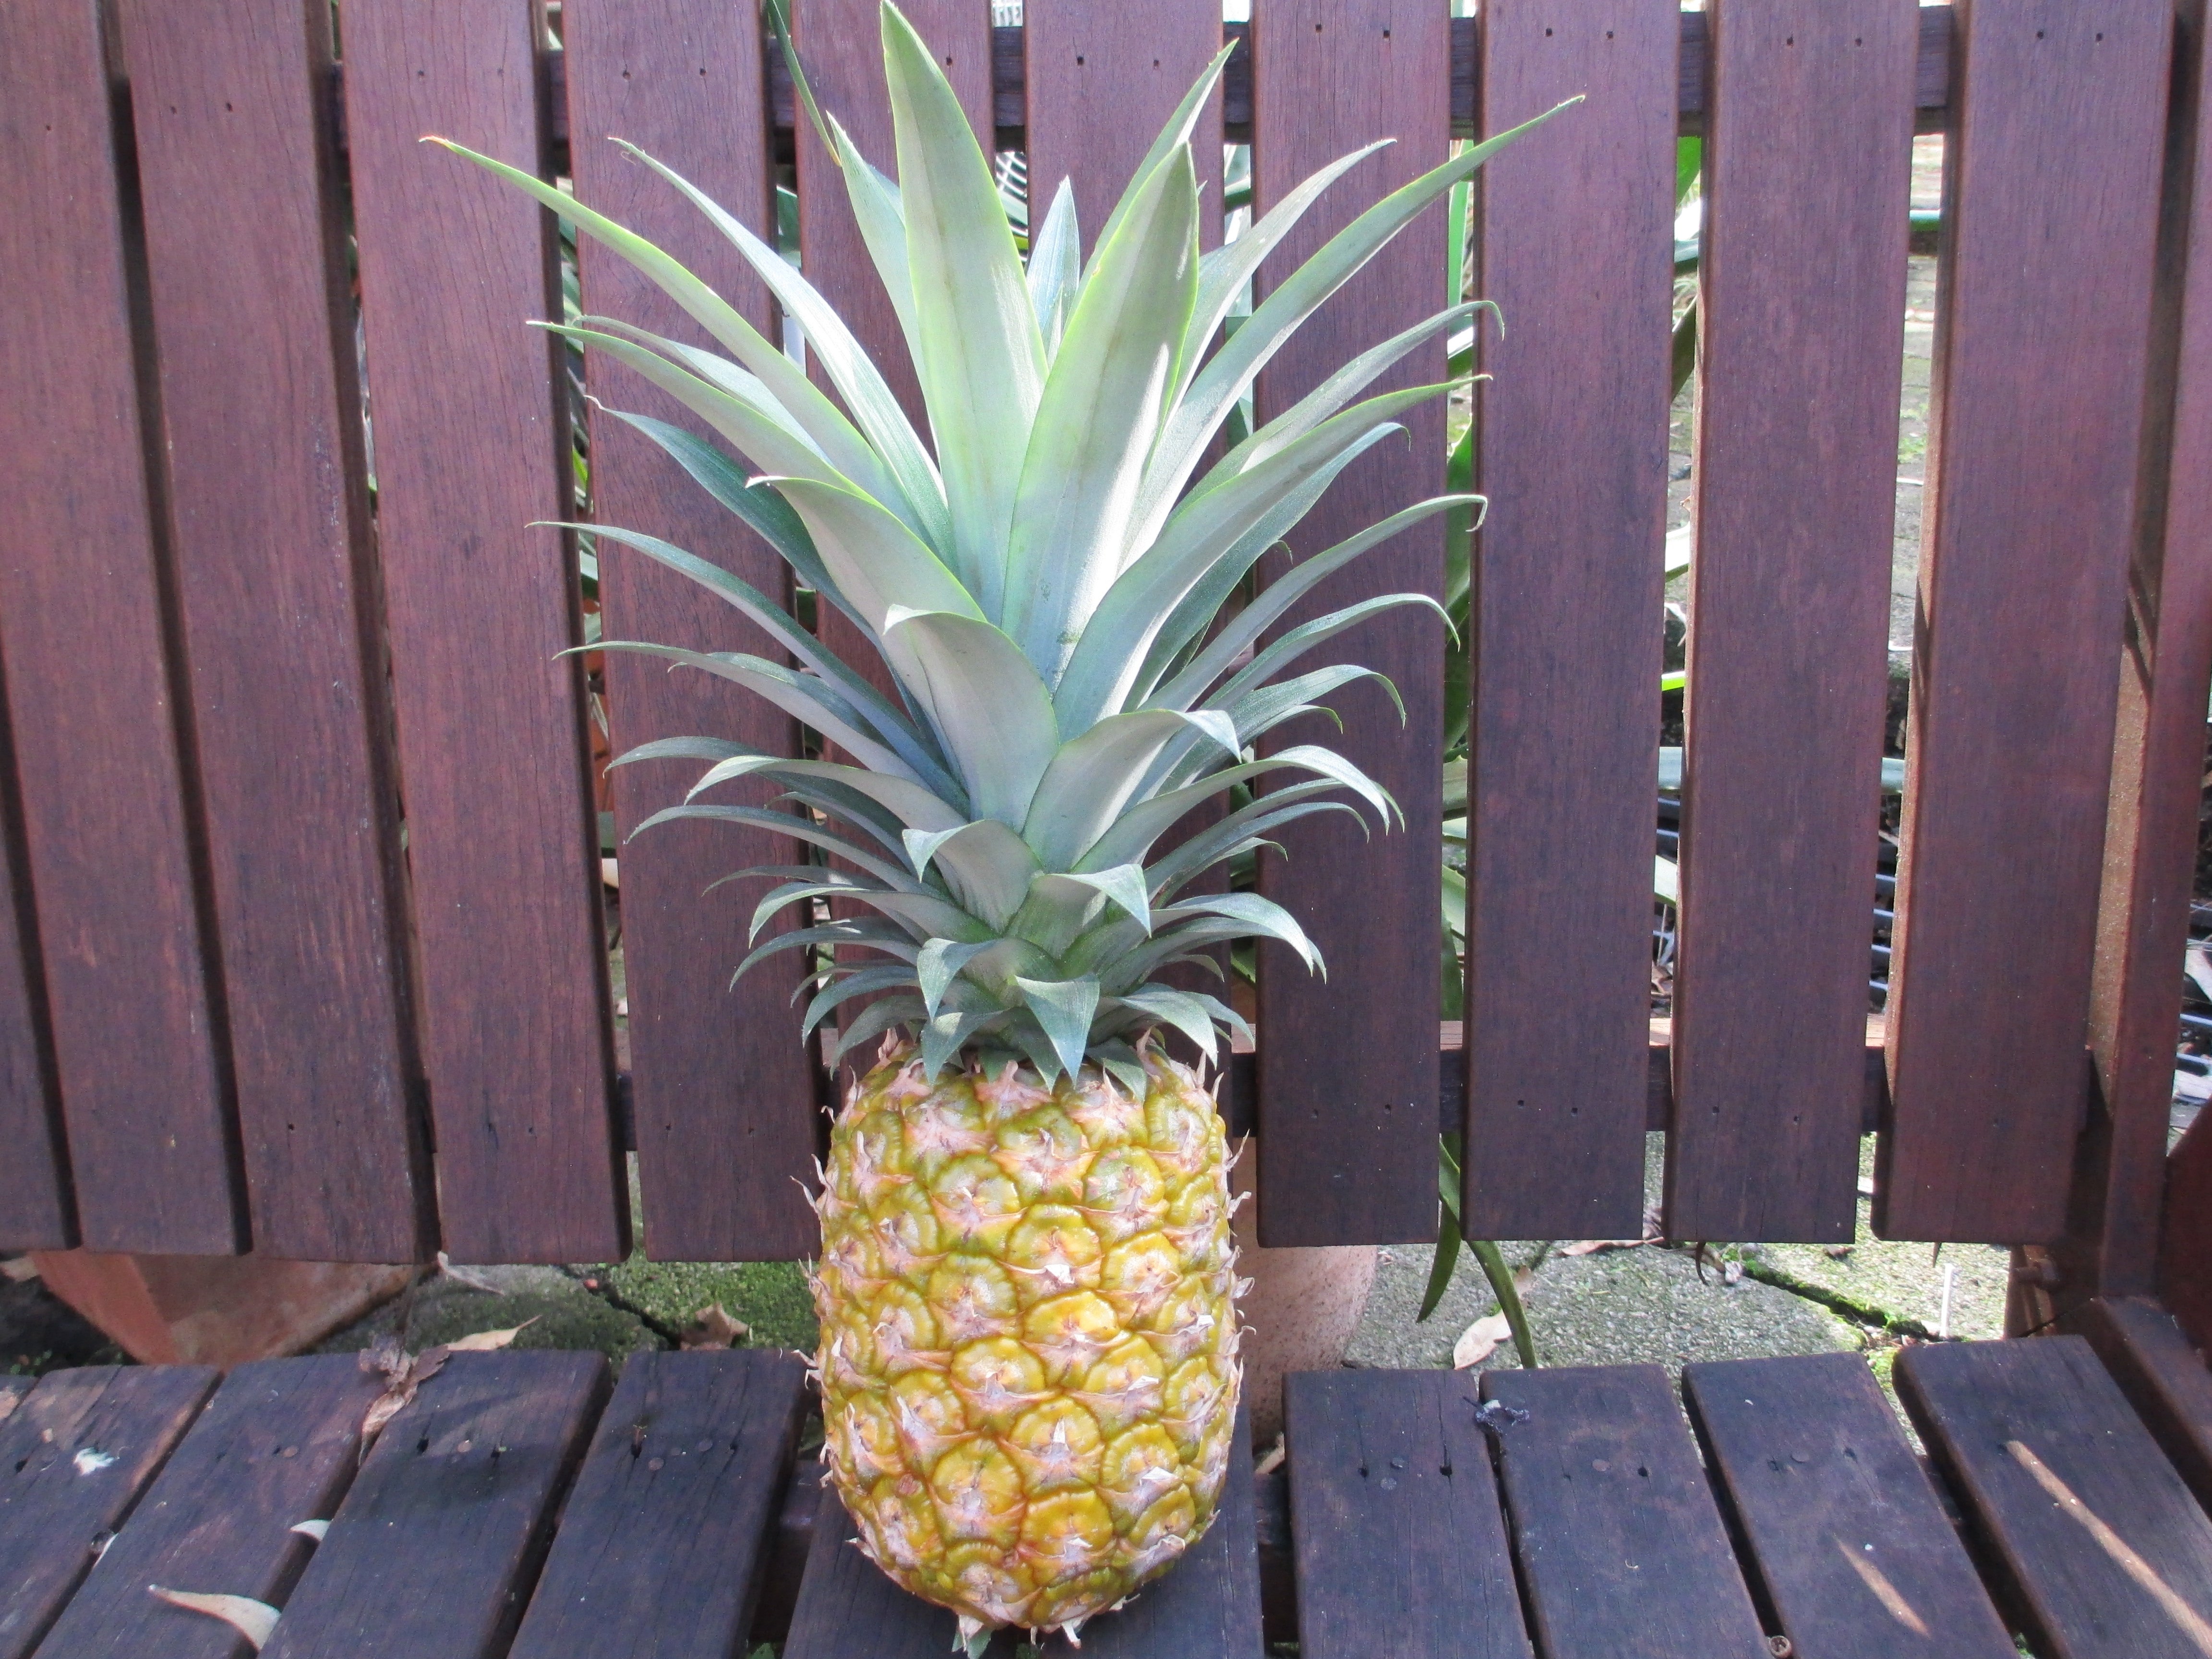 Magnificent pineapple!